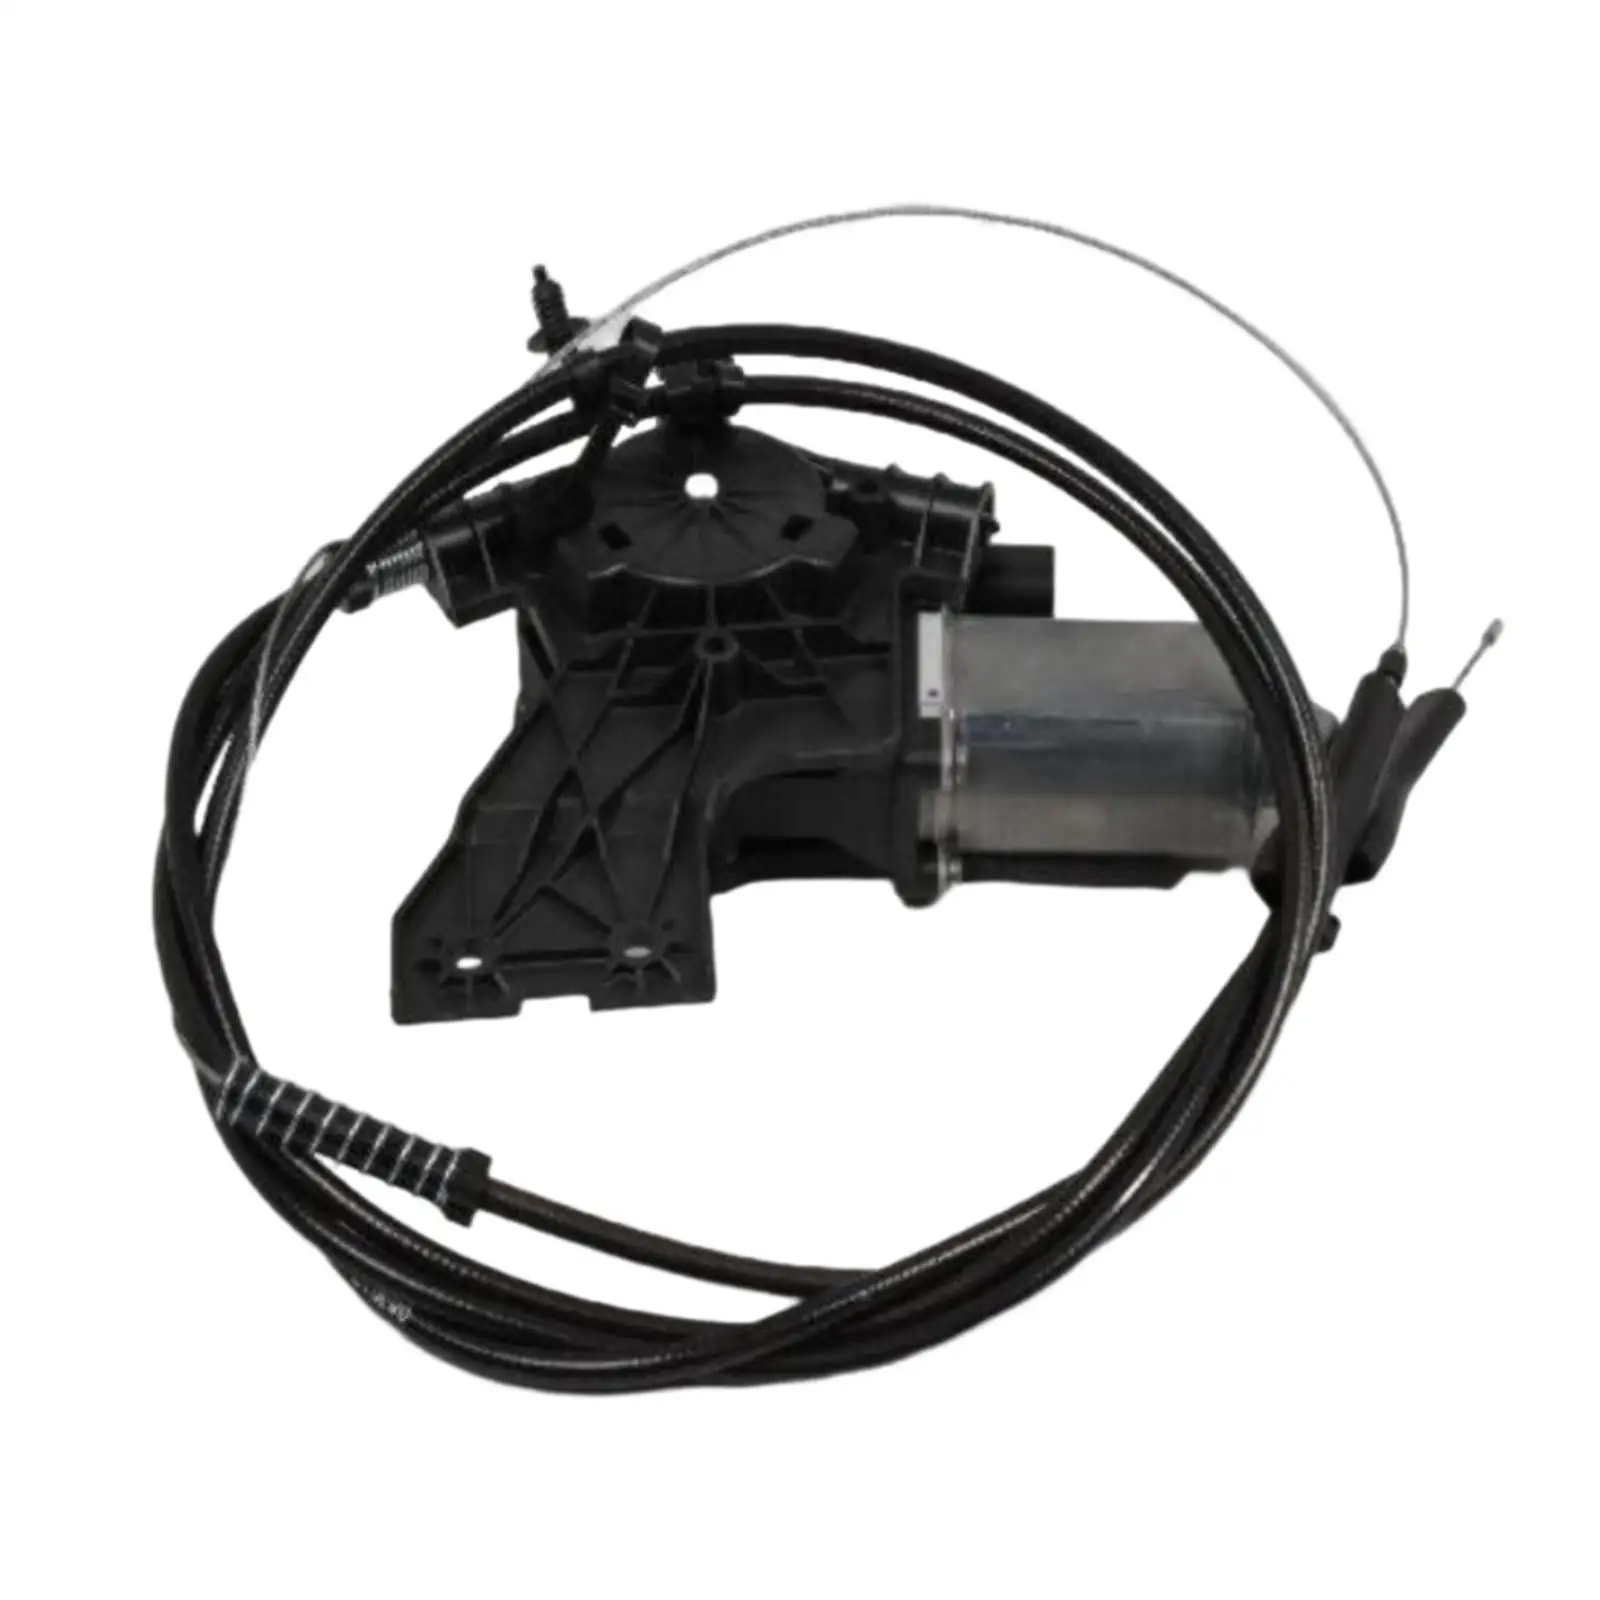 Car Rear Power Sliding Window Cable Assembly for Dodge RAM 1500 2006-2008 Easily to Install High Performance Durable